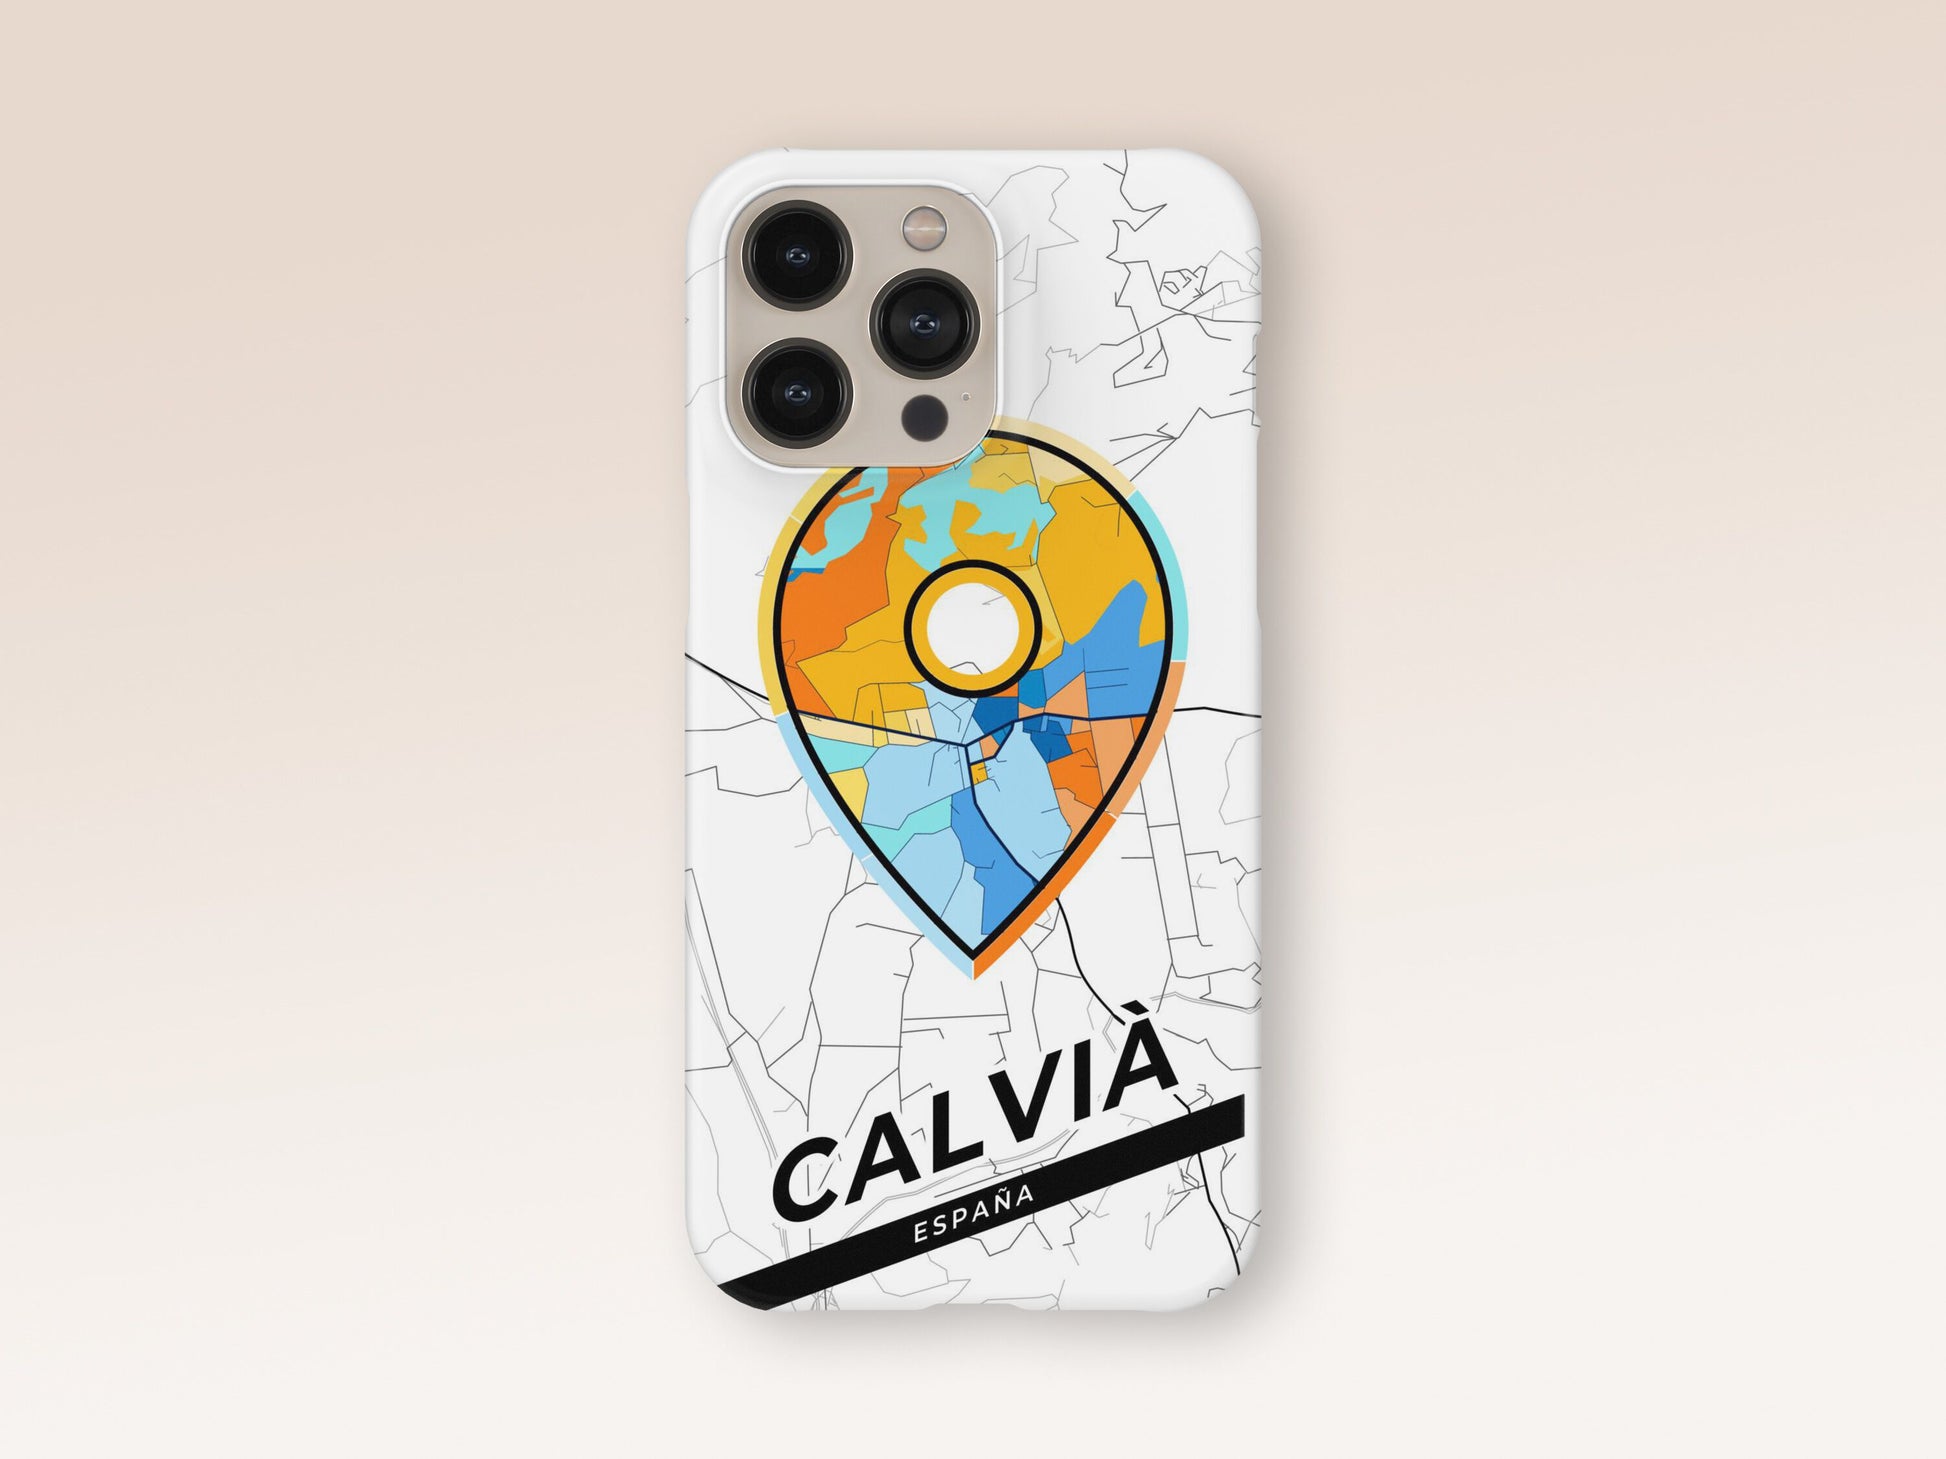 Calvià Spain slim phone case with colorful icon. Birthday, wedding or housewarming gift. Couple match cases. 1